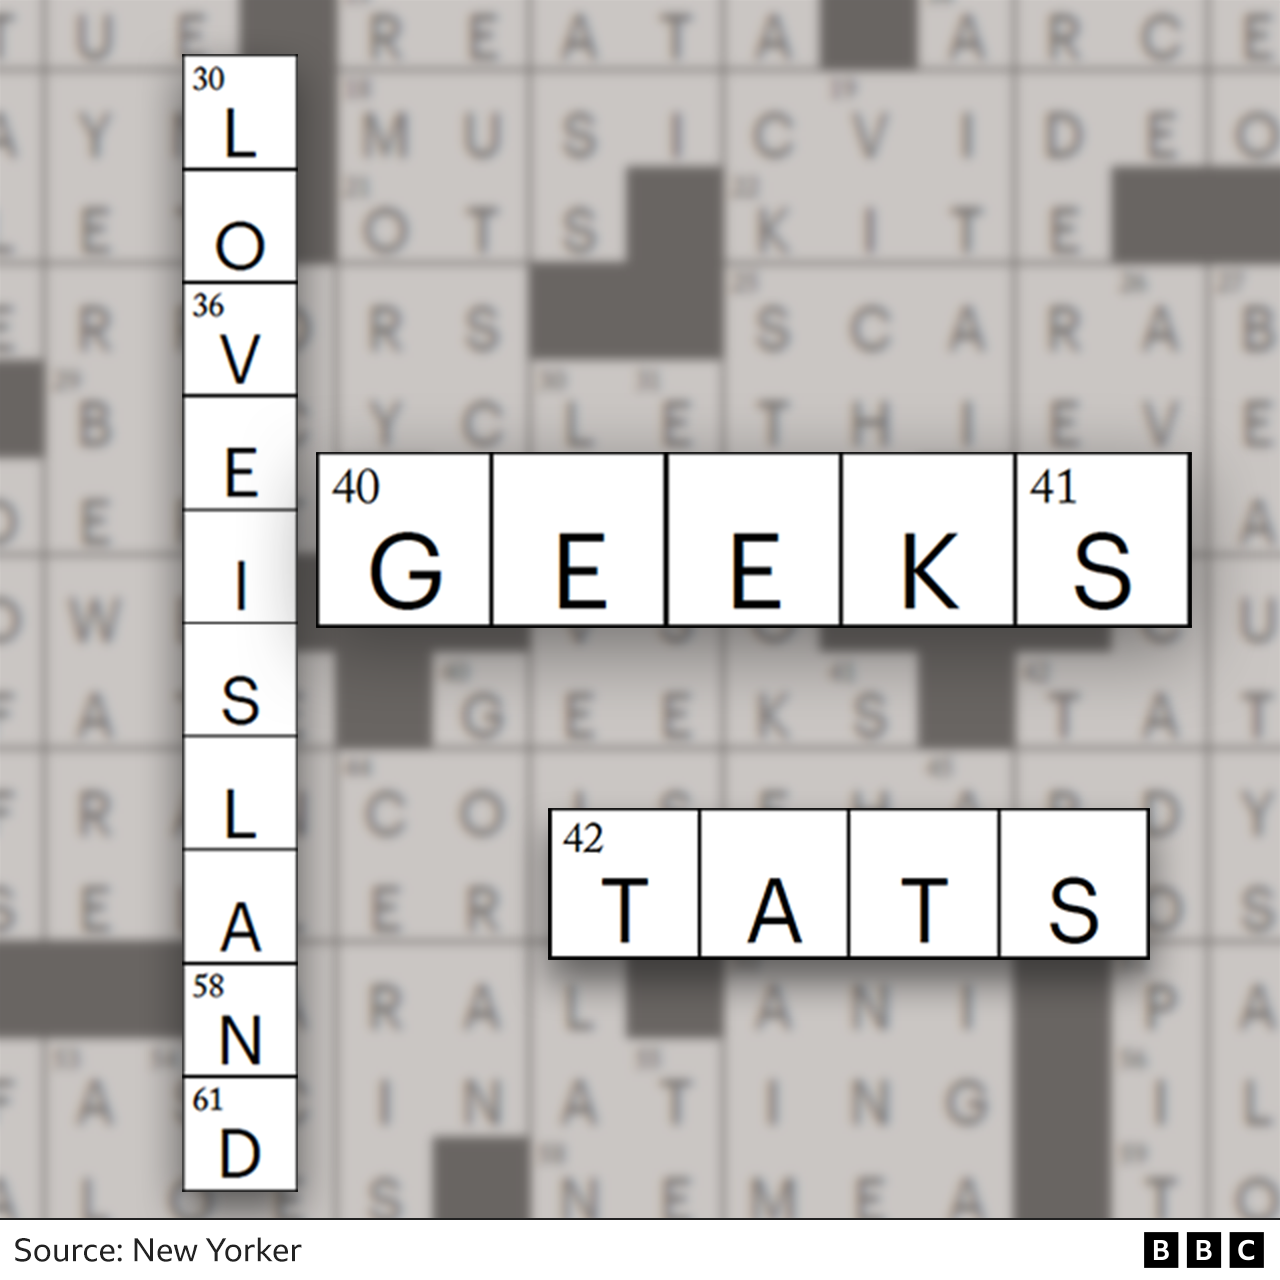 Love Island, geeks and tats (short for tattoos) - answers to one of Anna's crossword puzzle from 11 March 2022 in The New Yorker magazine